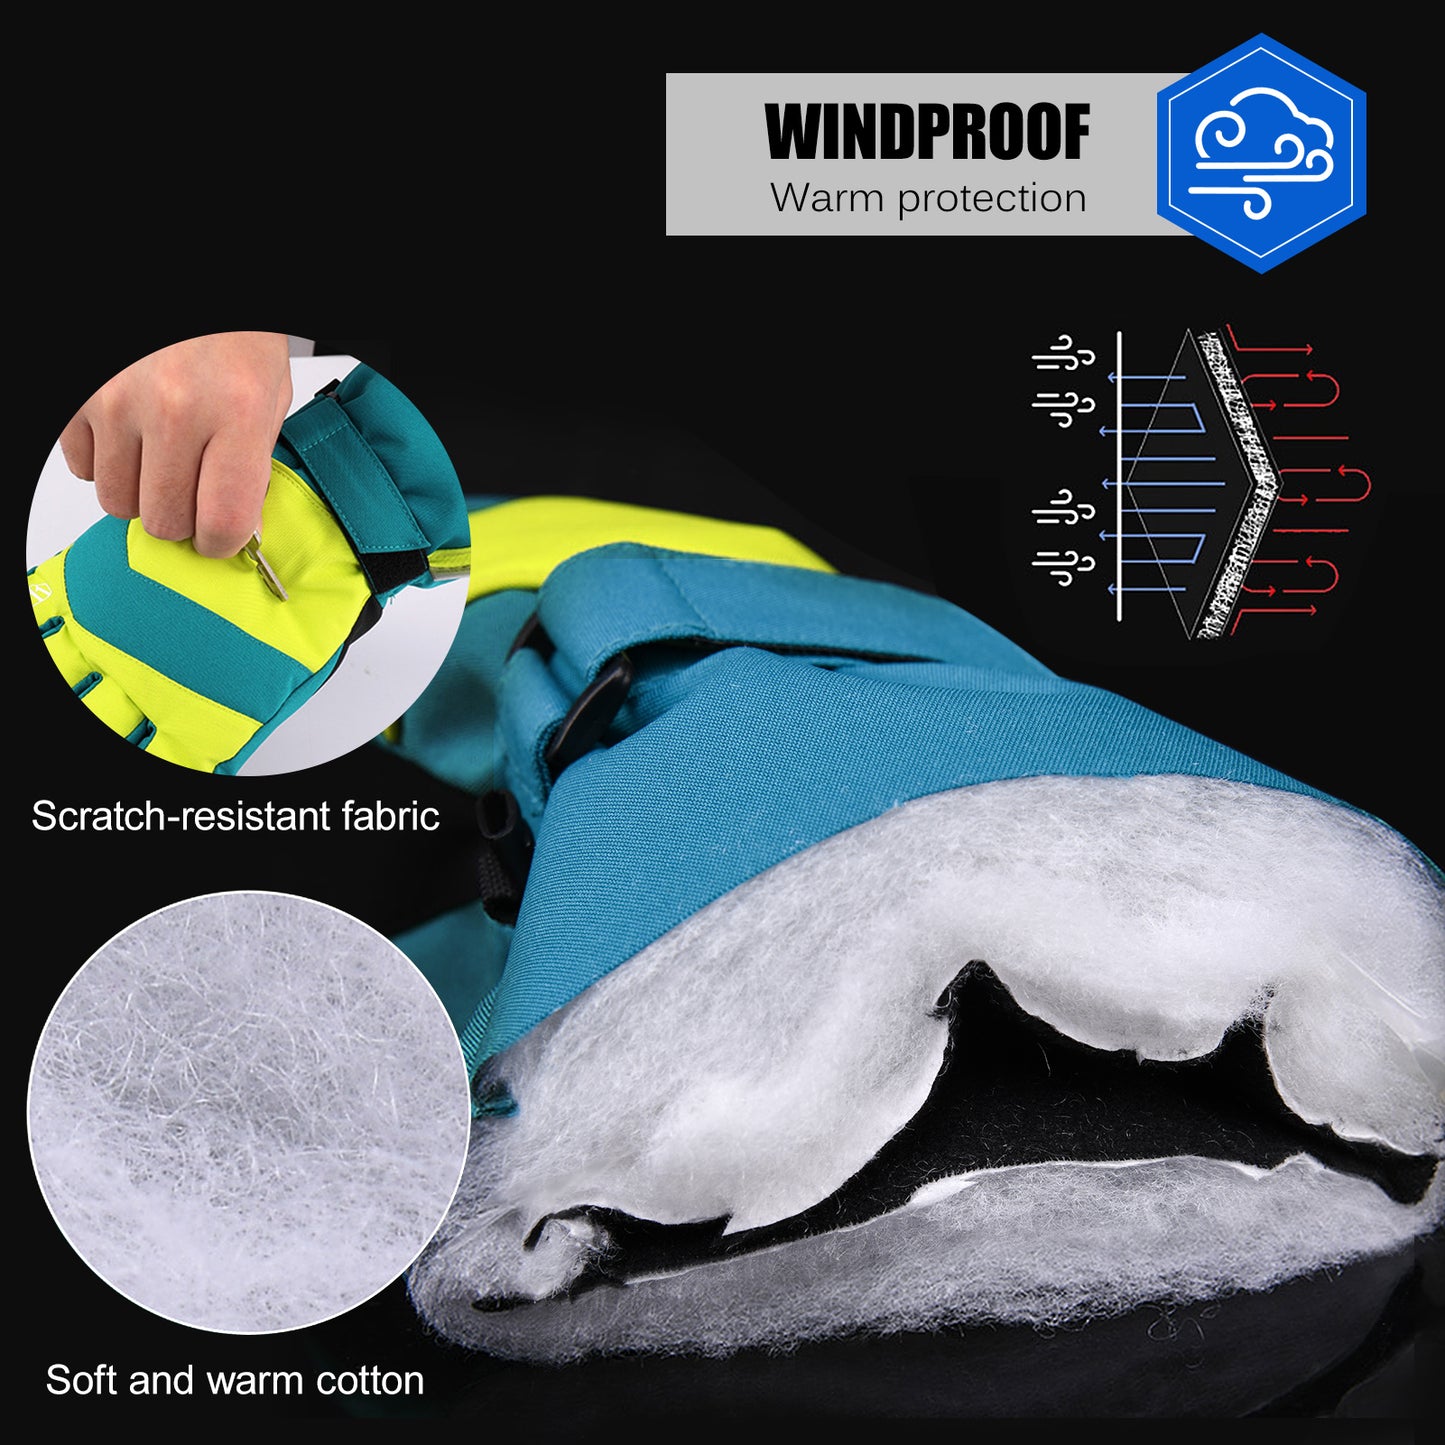 WHEEL UP Winter Gloves Waterproof Windproof Gloves Warm Snowboard Gloves Ski Gloves Bicycle Gloves for Adult